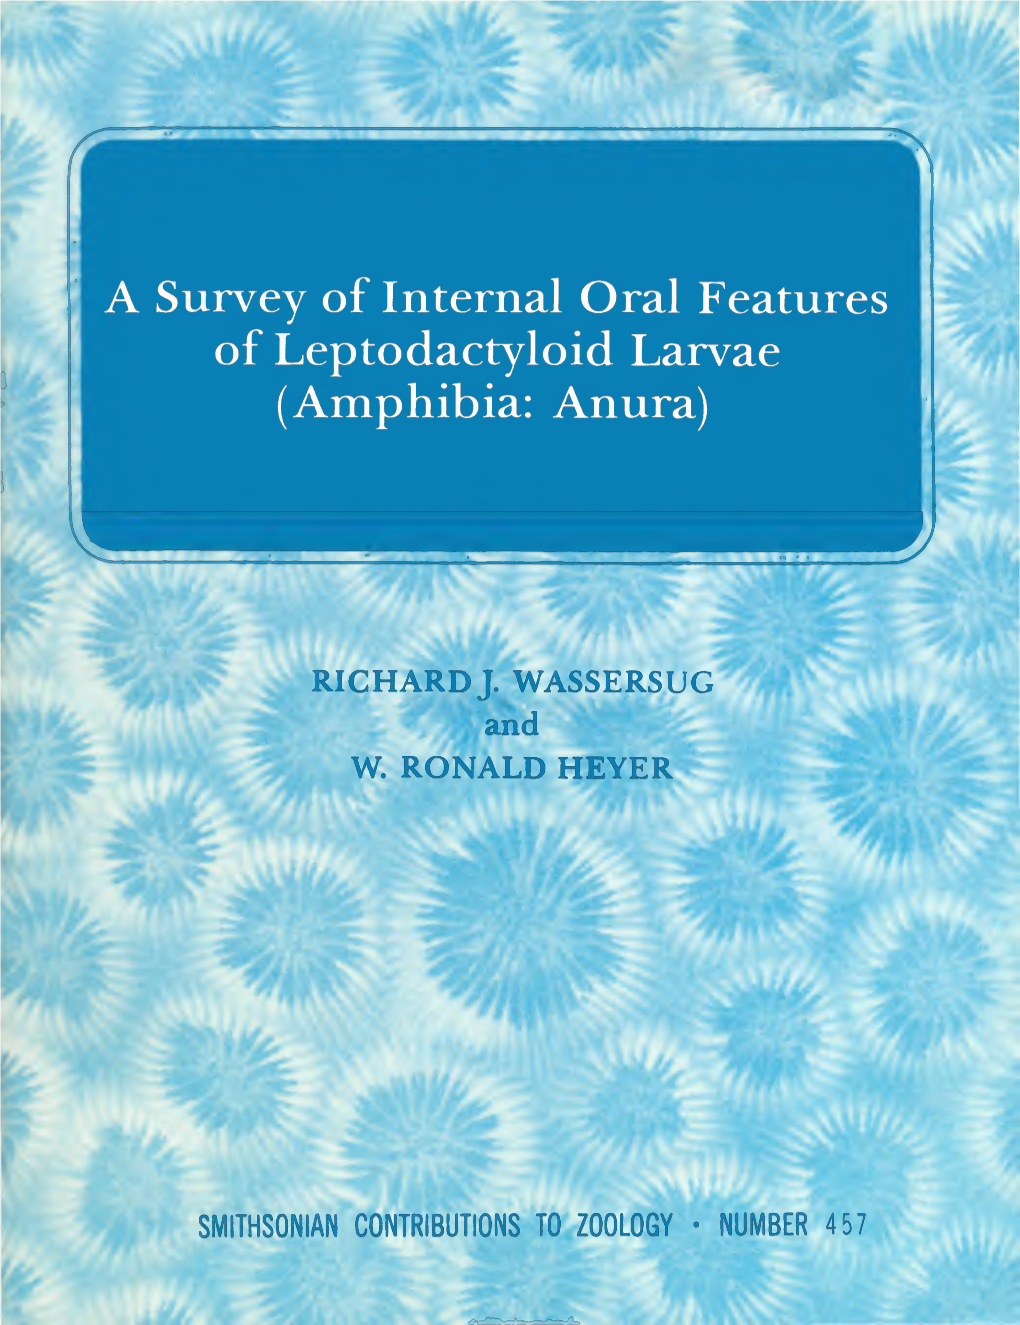 A Survey of Internal Oral Features of Leptodactyloid Larvae (Amphibia: Anura)